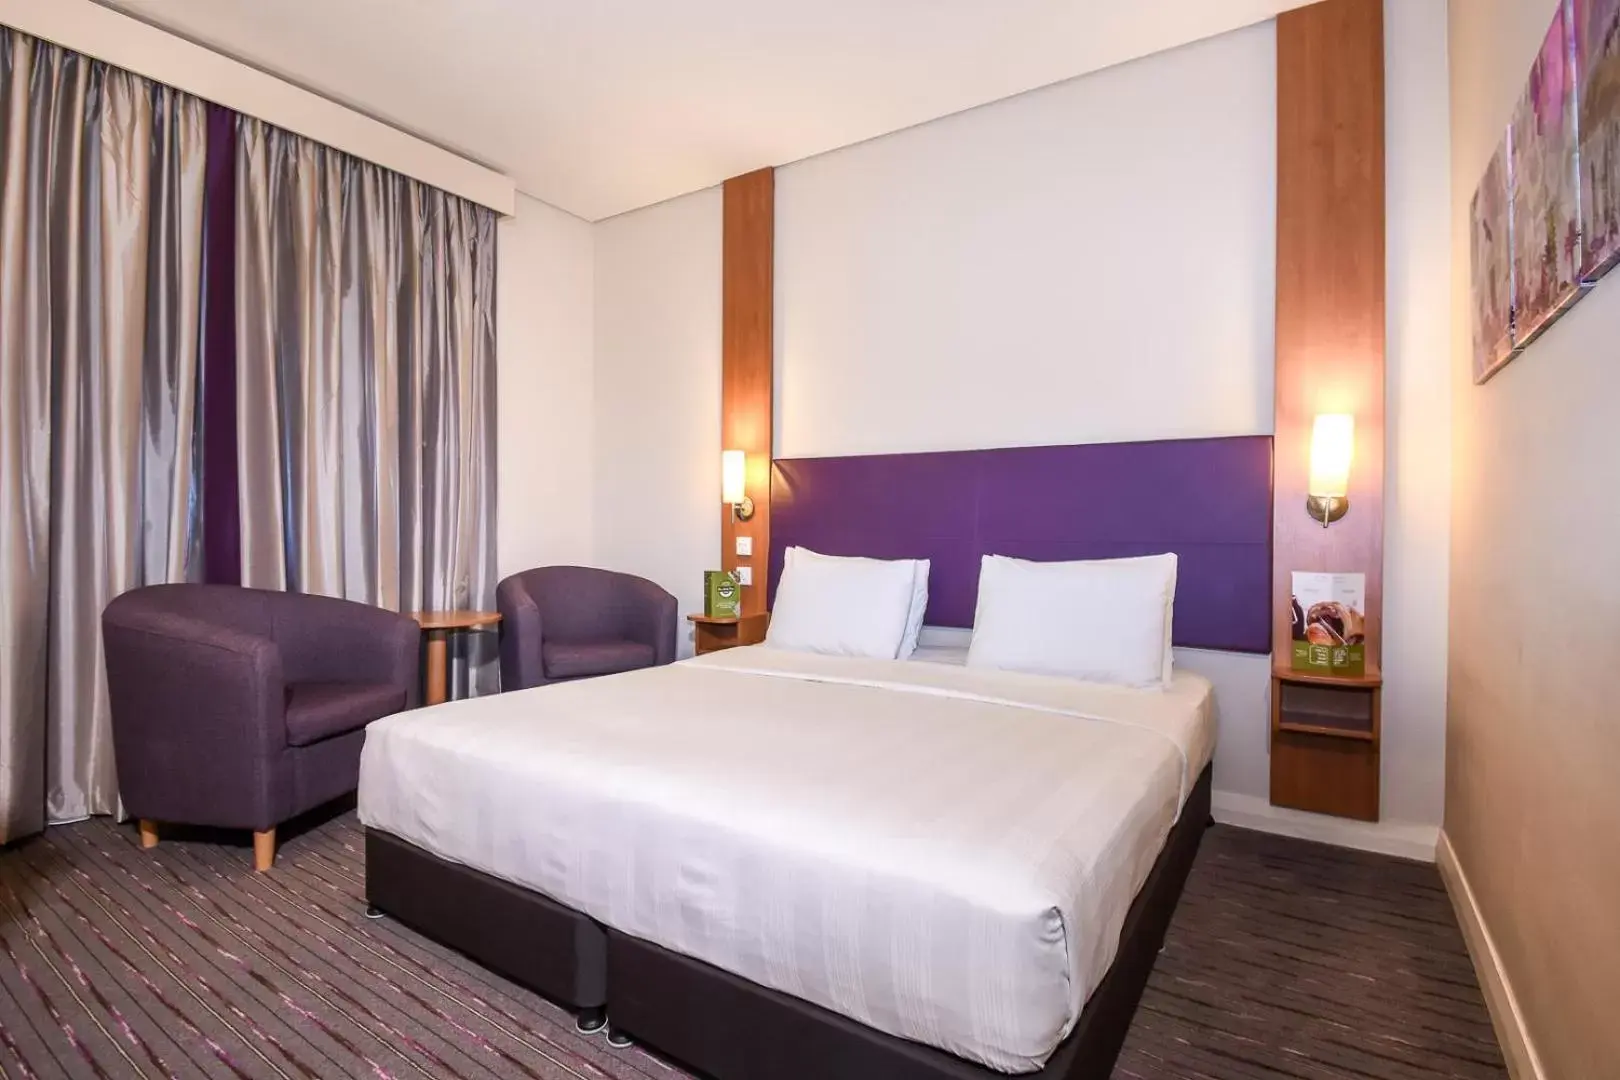 Double Room - Smoking - Free DXB Airport Shuttle Every 30 mins to T3 & T1 in Premier Inn Dubai International Airport